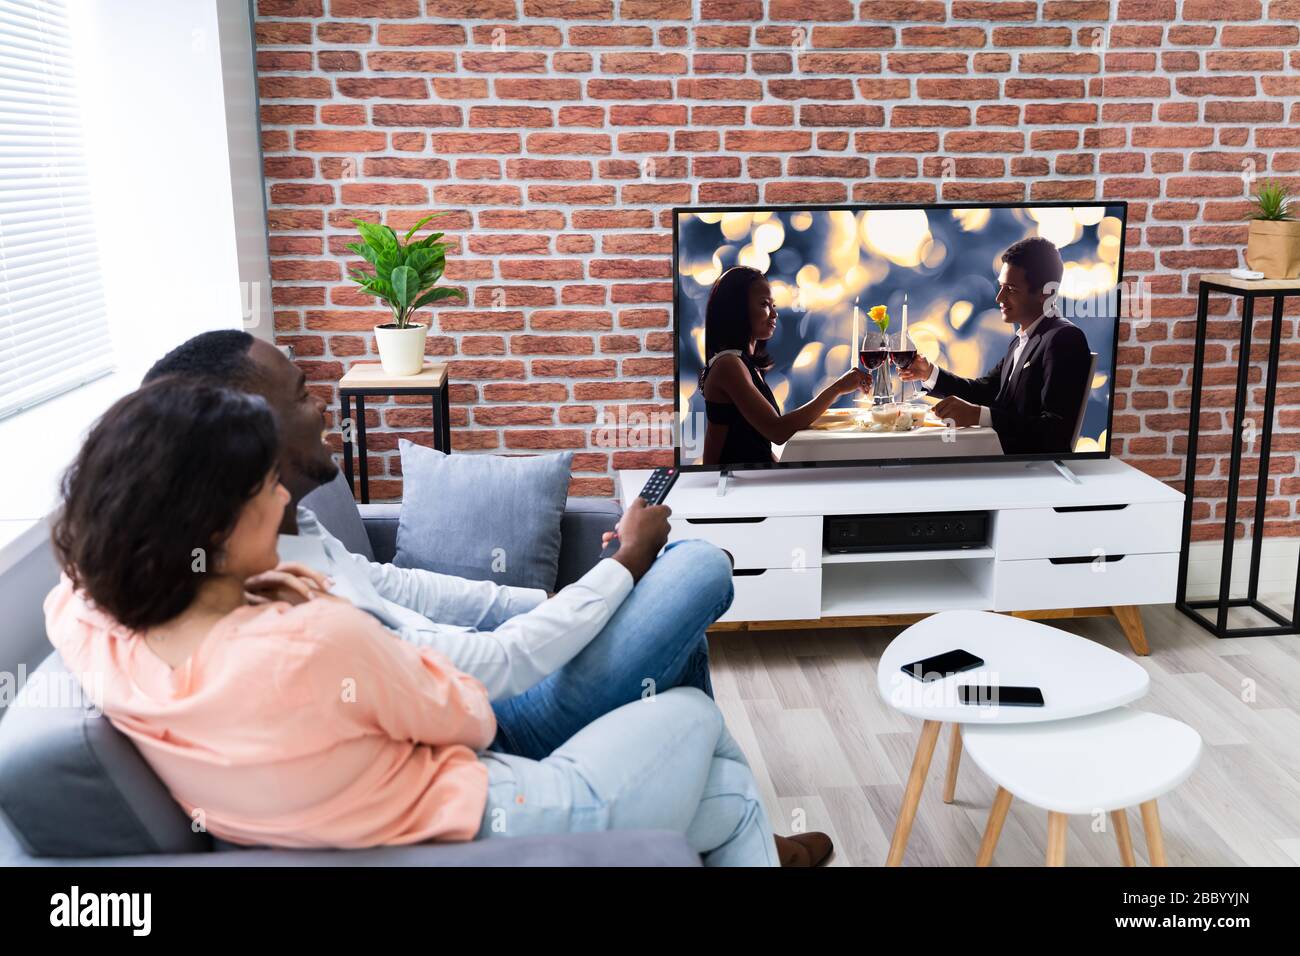 Rear View Of A Couple Watching Movie On Television At Home Stock Photo